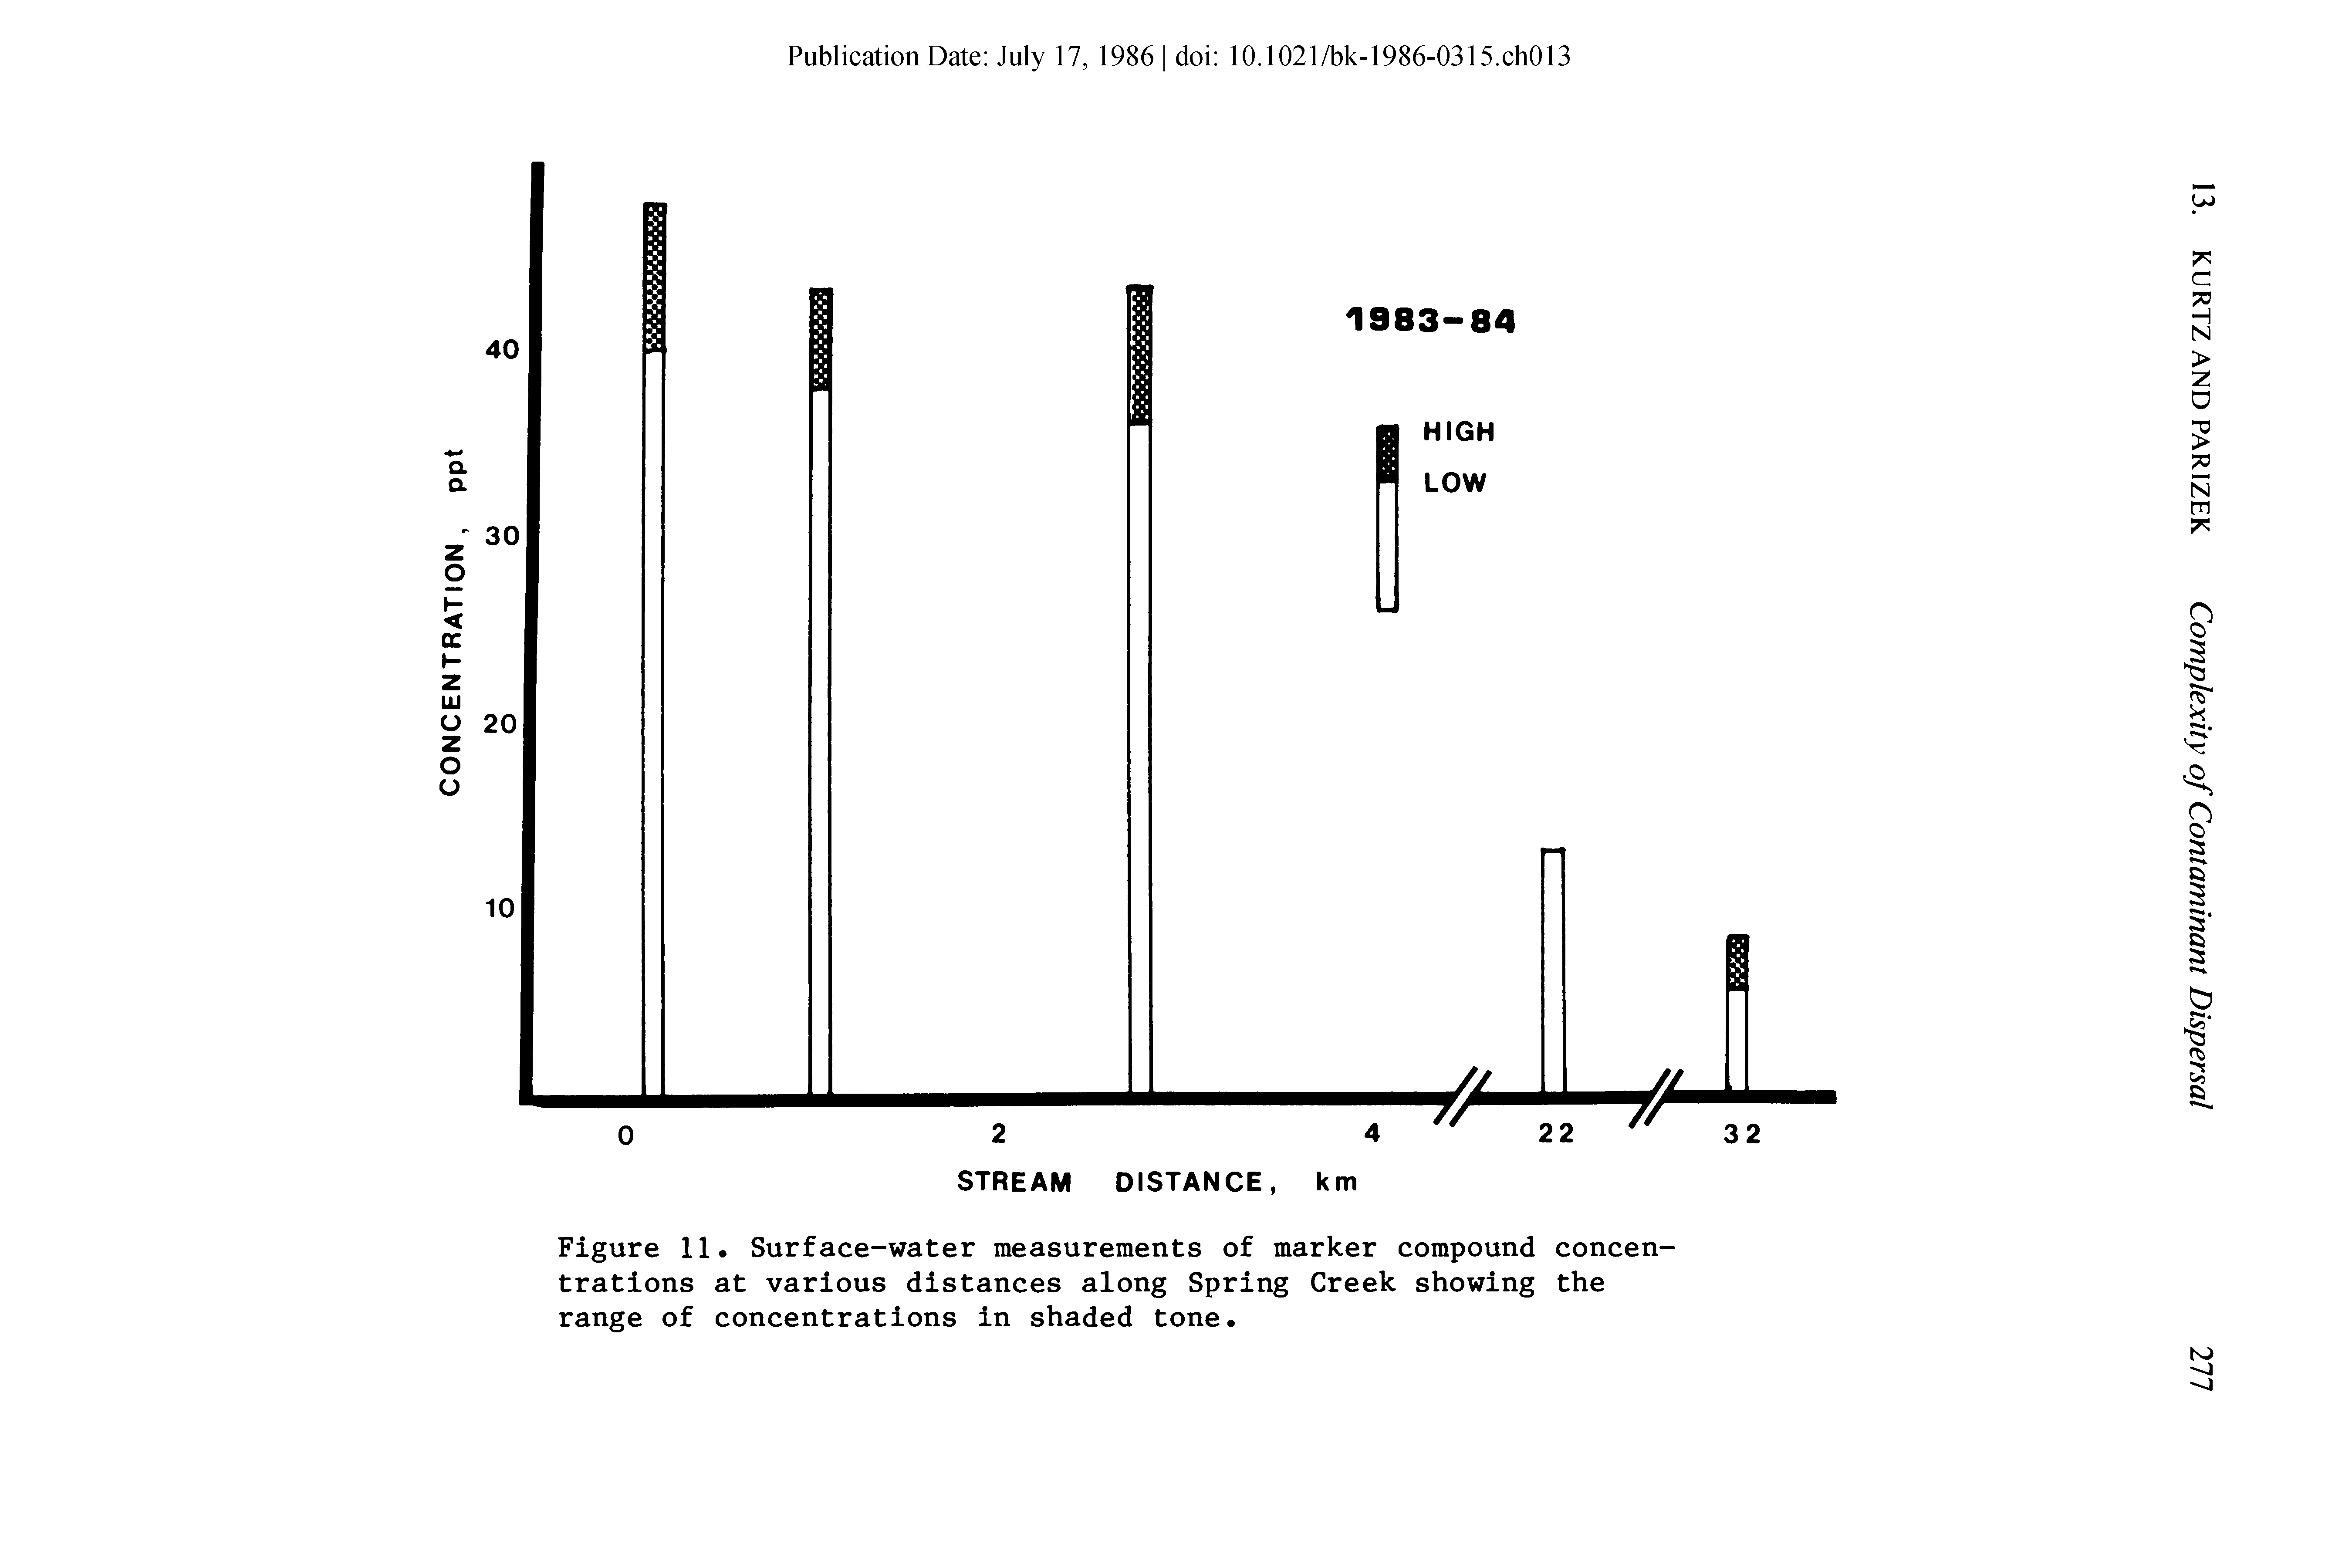 Figure 11. Surface-water measurements of marker compound concentrations at various distances along Spring Creek showing the range of concentrations in shaded tone.